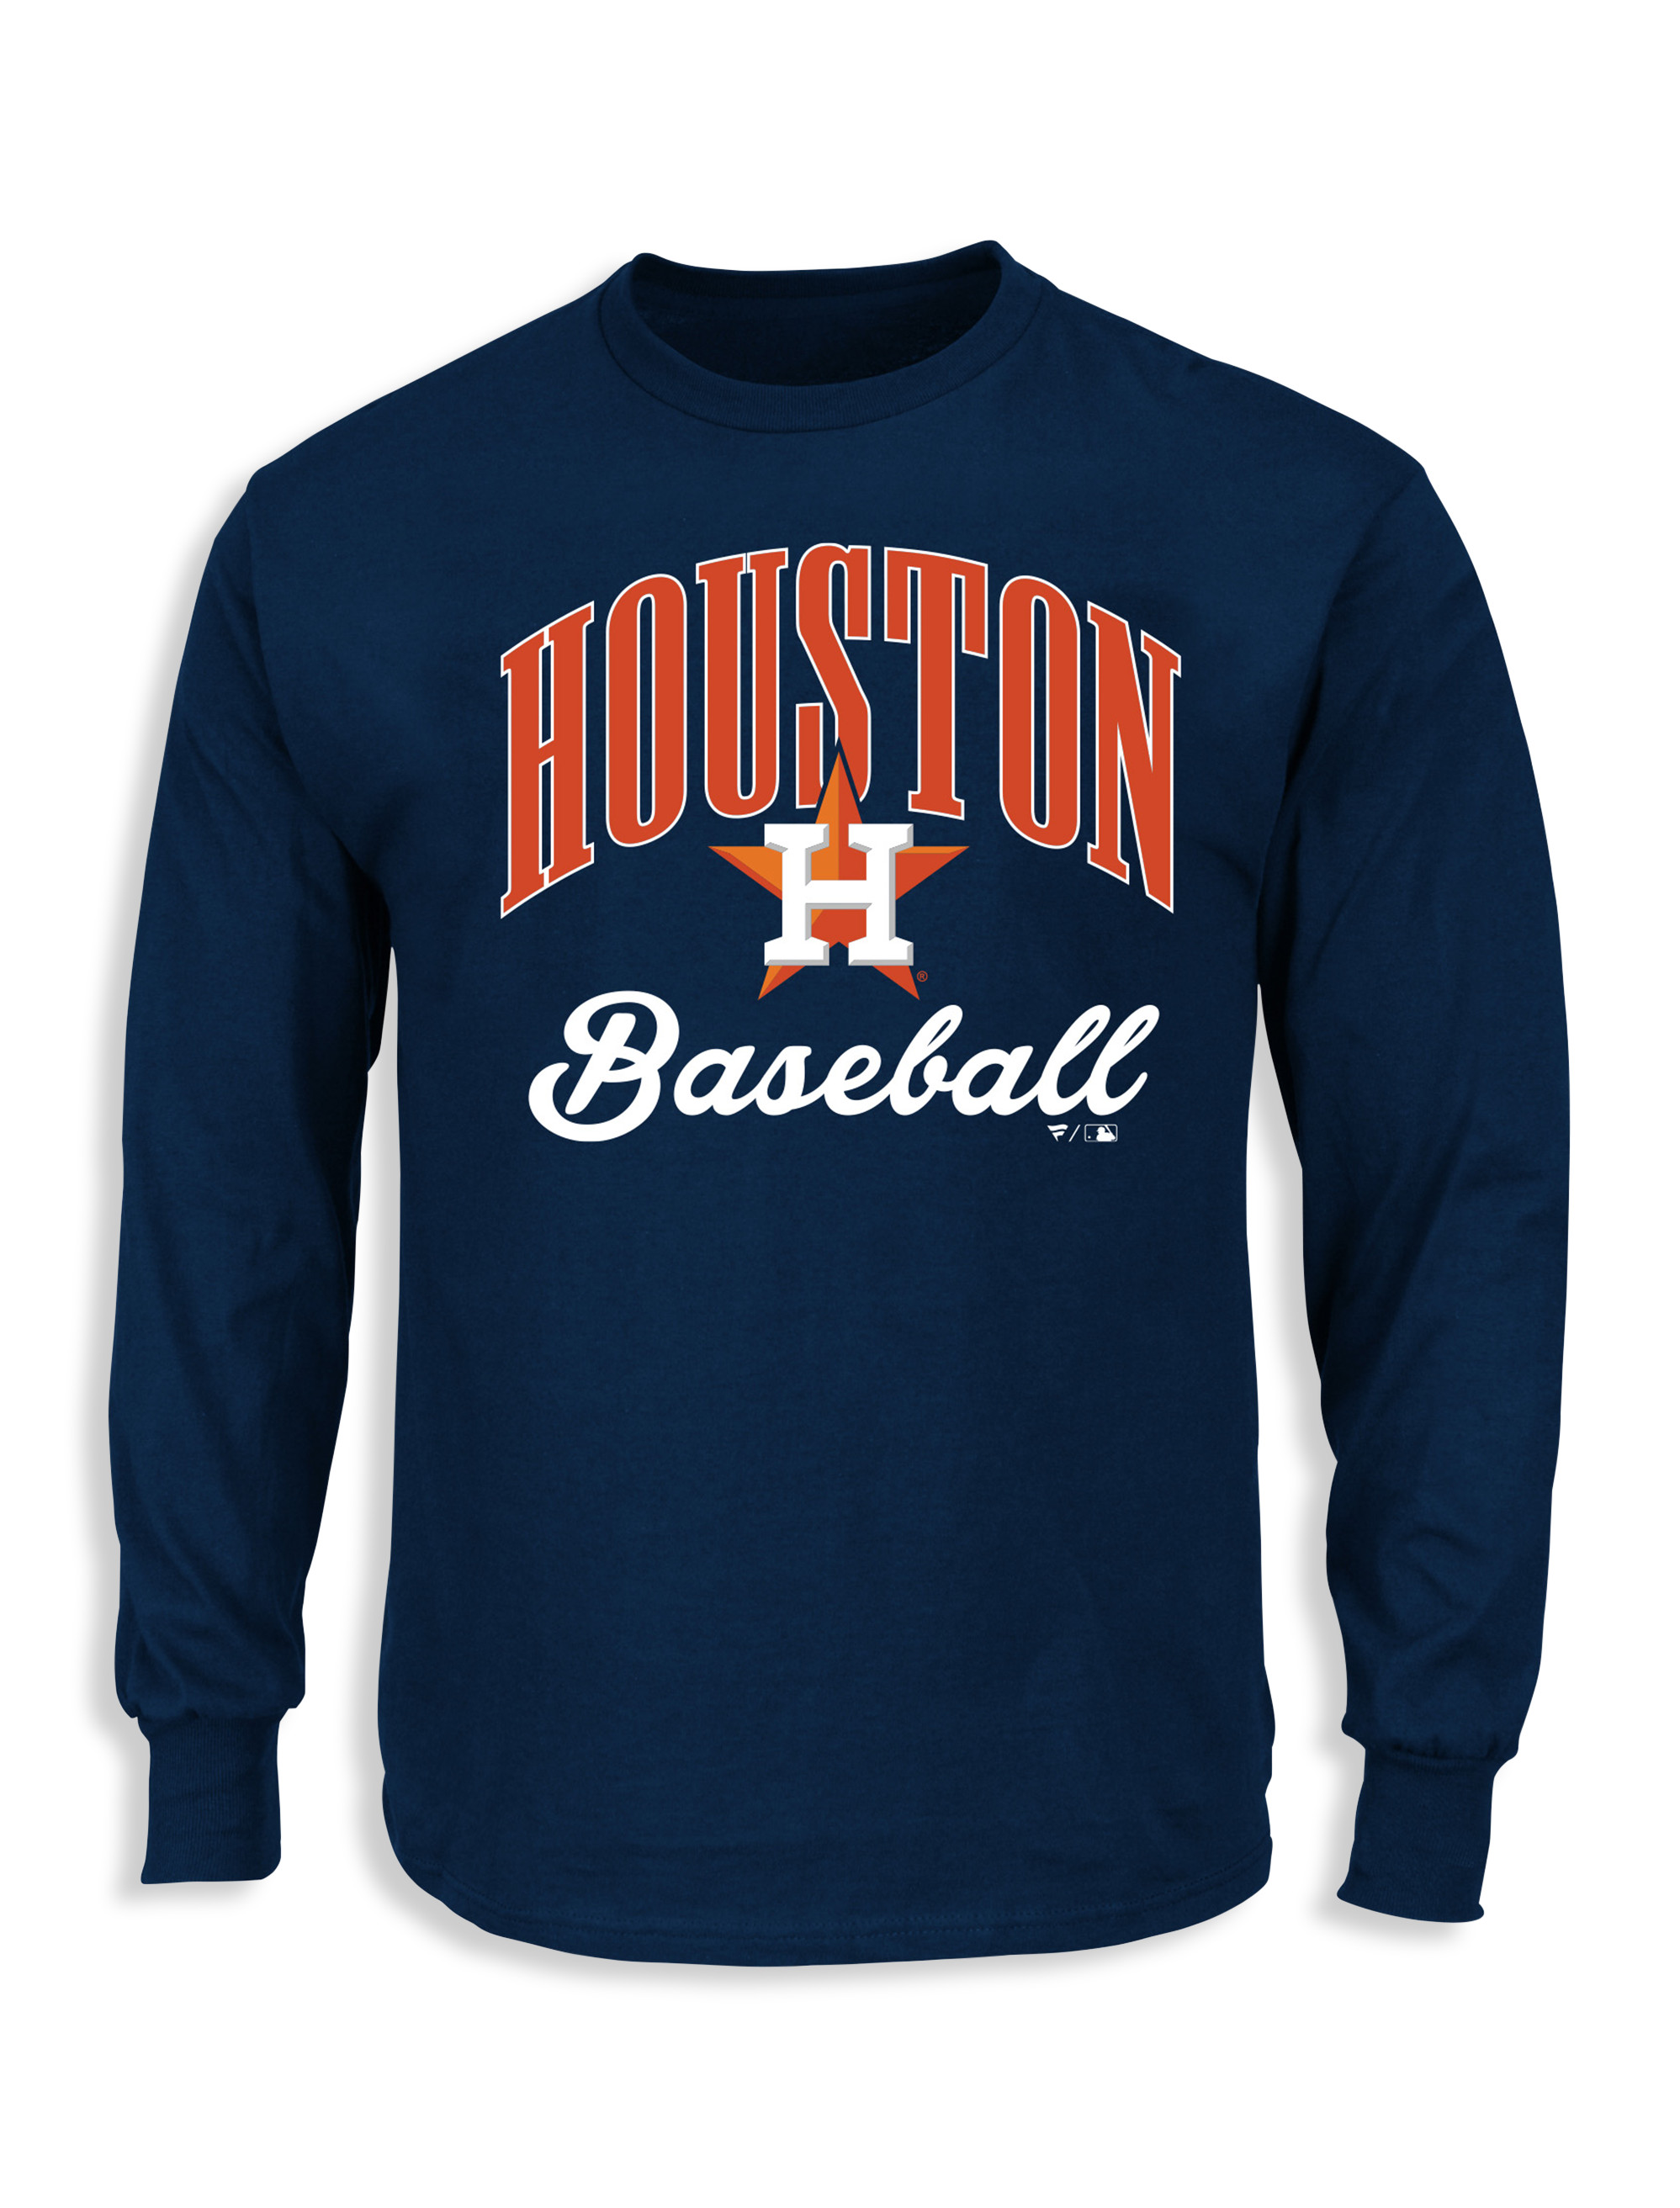 Official Houston astros cooperstown walk tall T-shirt, hoodie